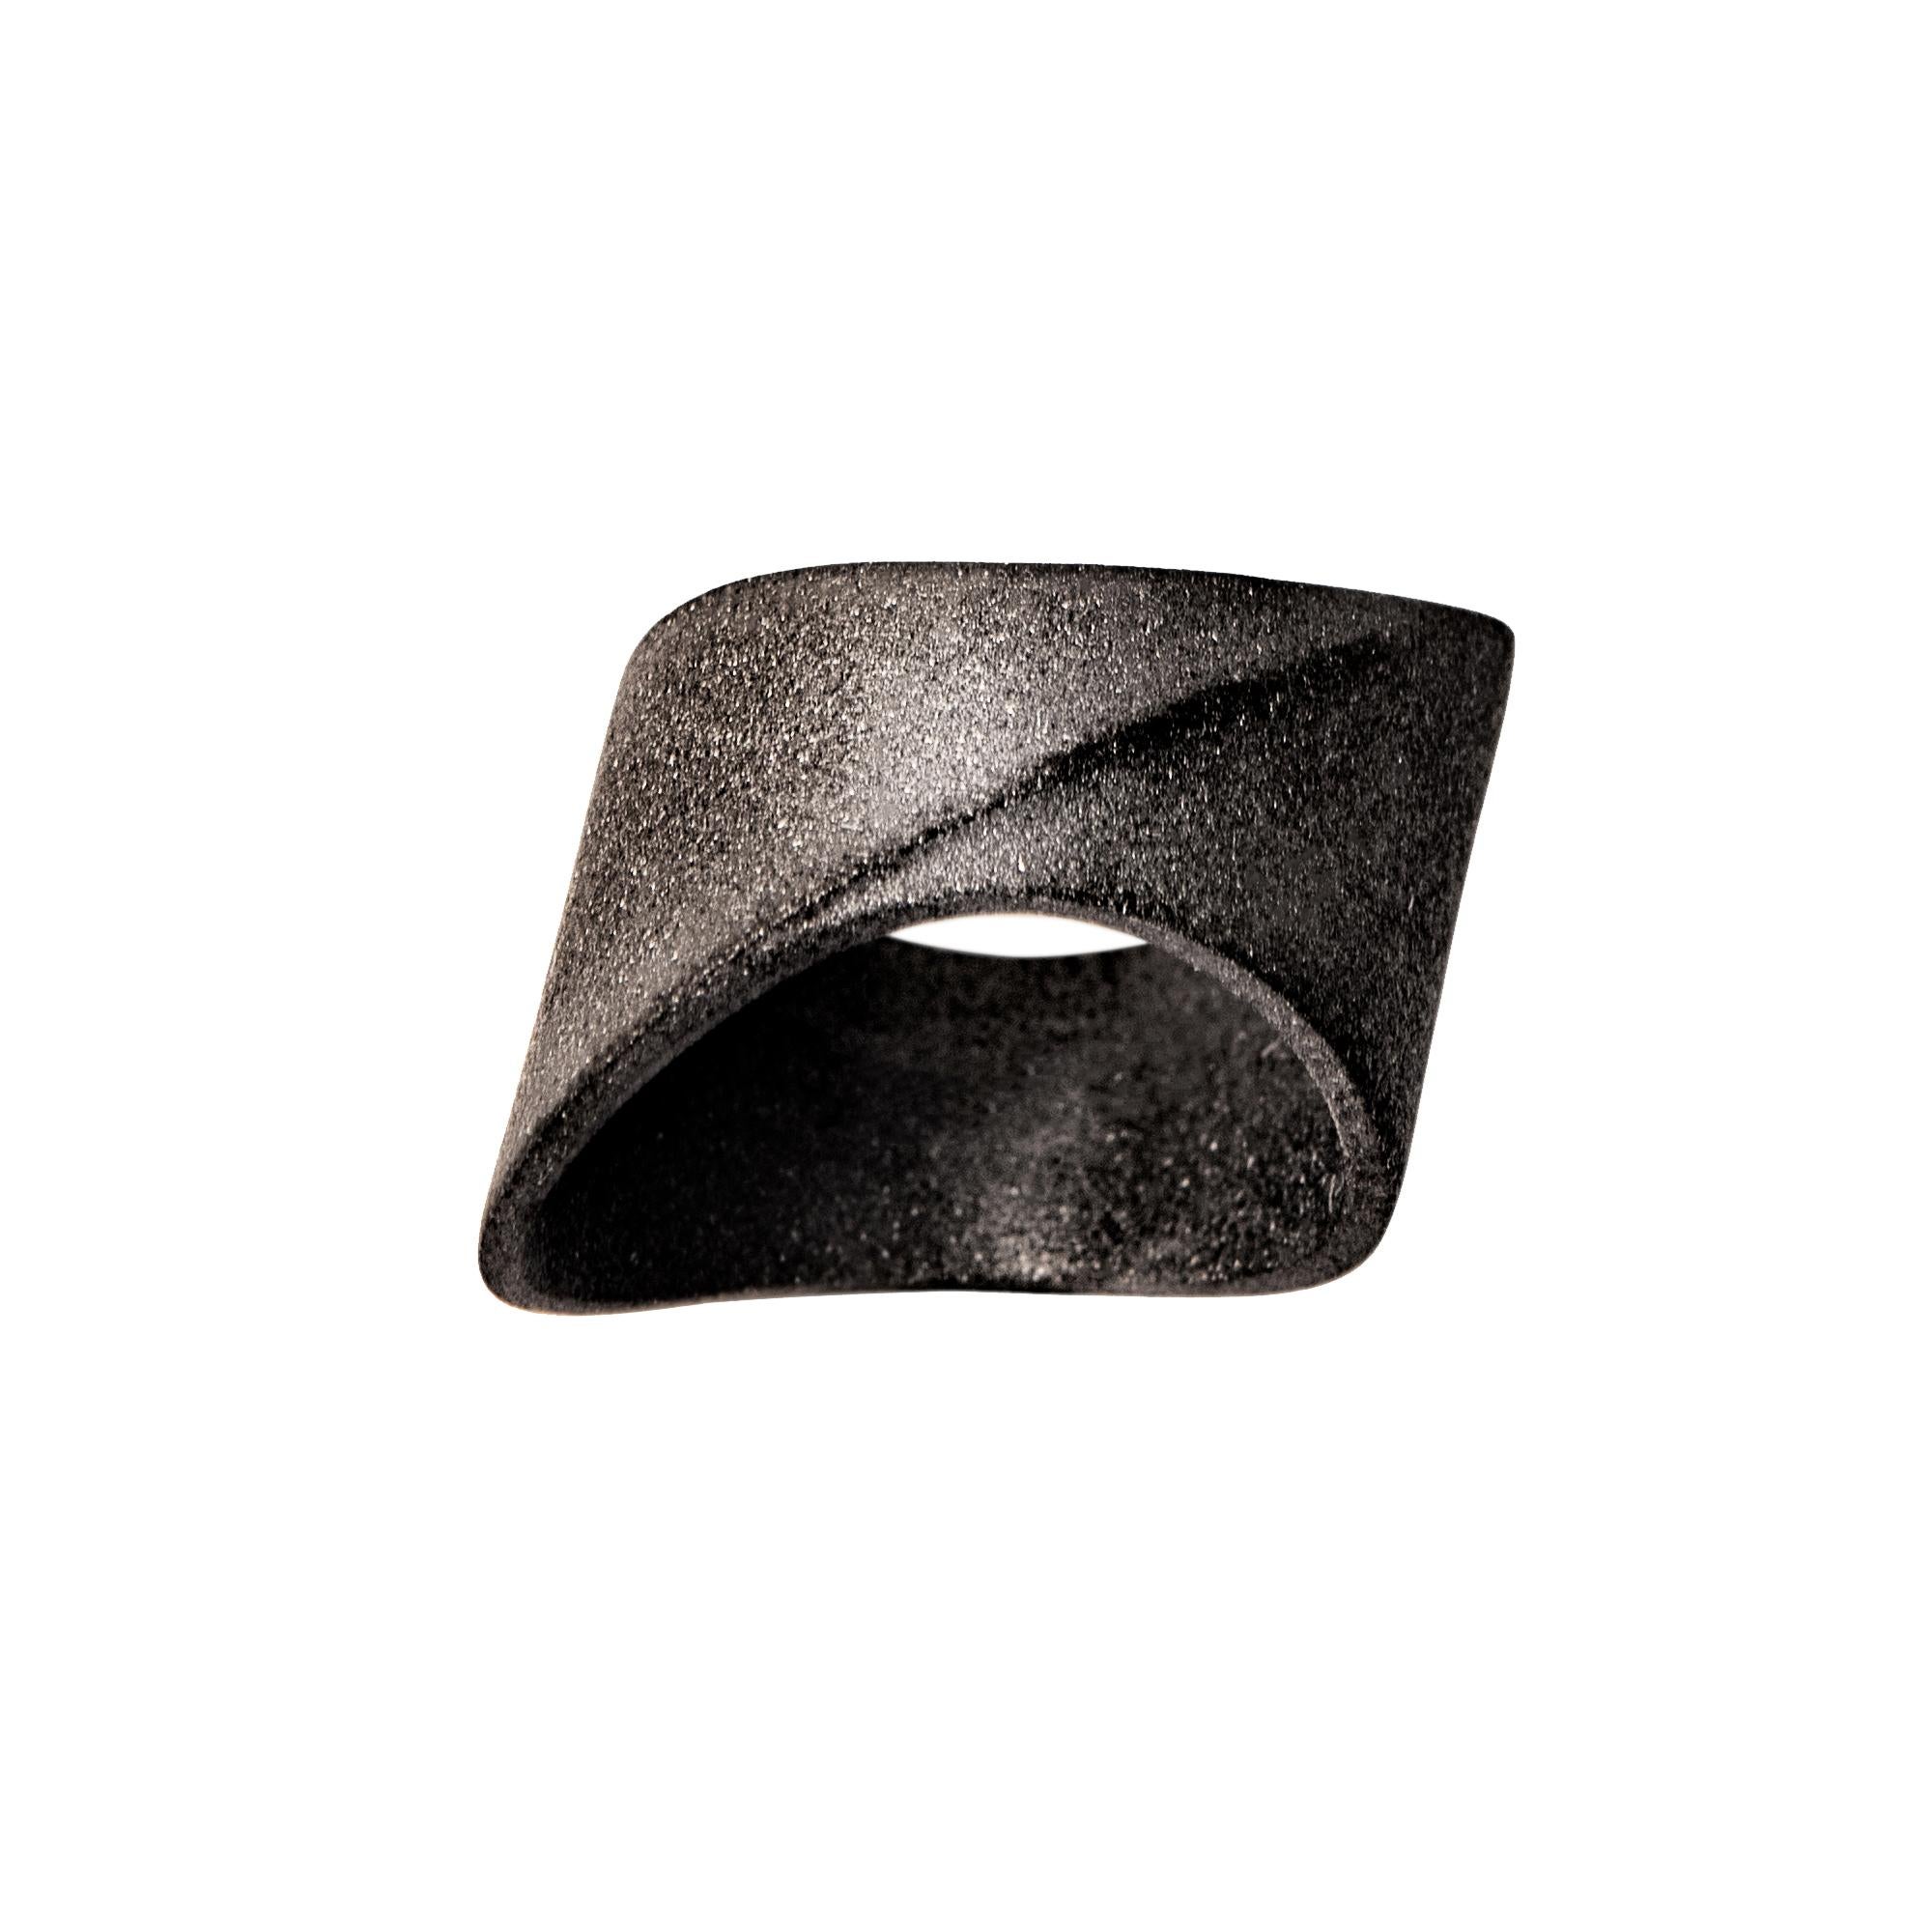 Unisex band ring with a minimalistic and bold design.
Size UK P - US 8 in stock, more sizes available upon request, made to order items are not returnable.
Perfect worn solo or horizontally stacked with multiple rings from the collection. 
Black